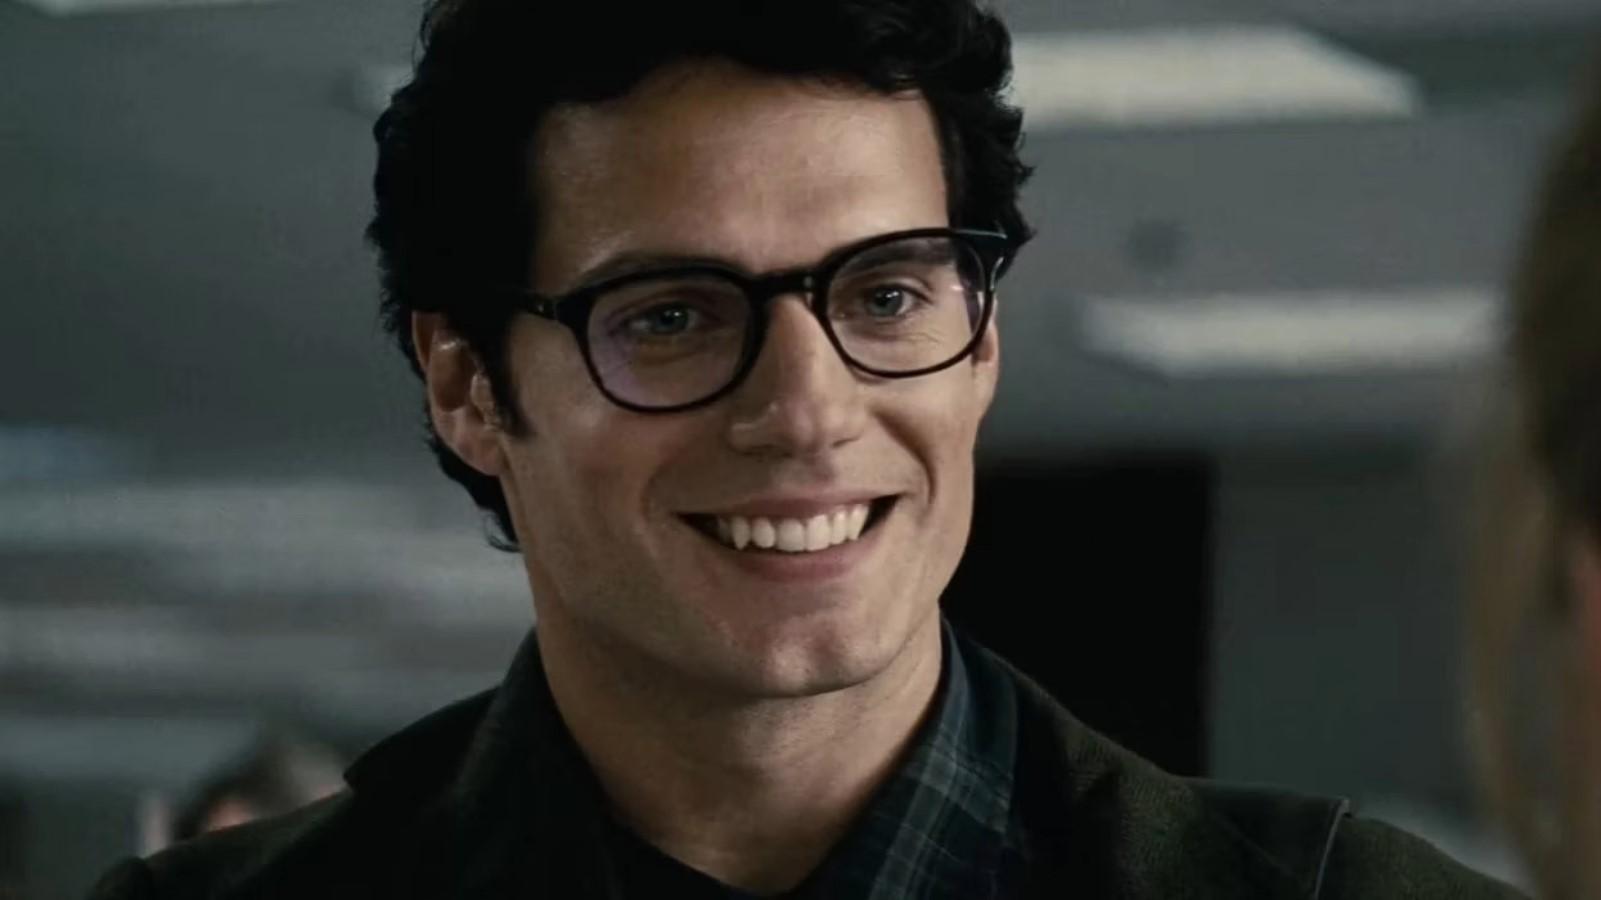 Henry Cavill as Superman, smiling and wearing glasses